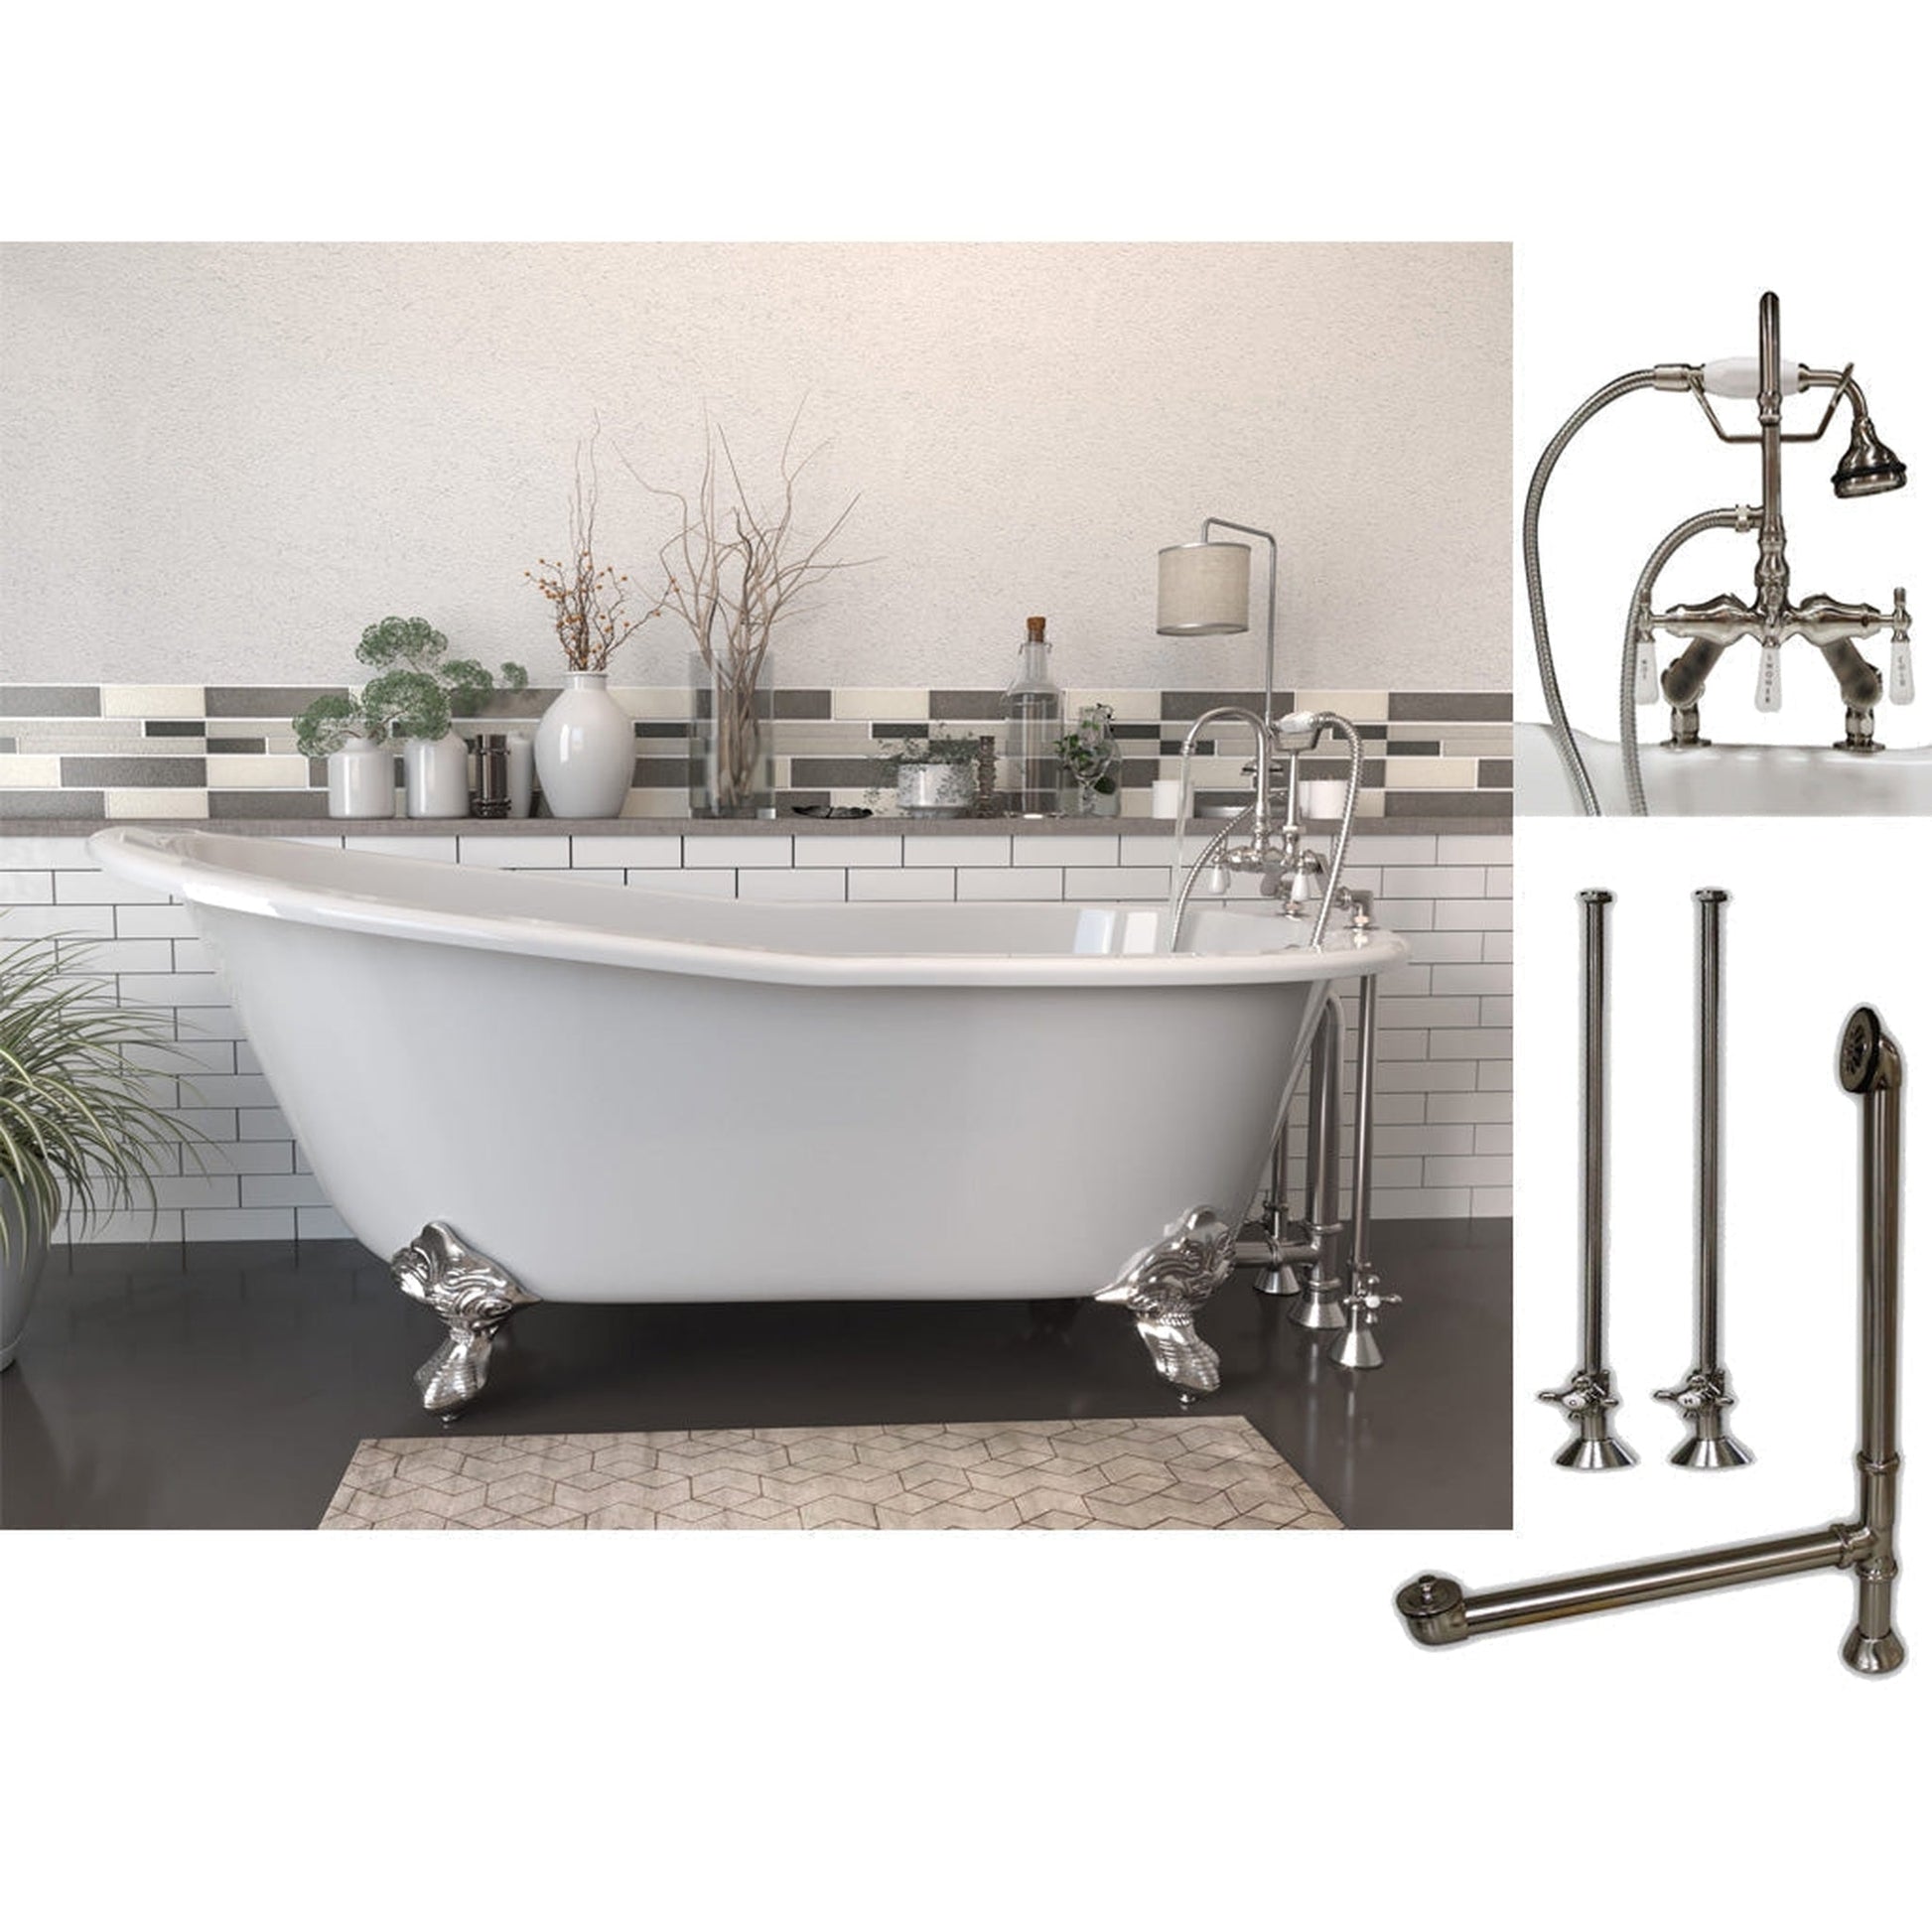 Cambridge Plumbing 61" White Cast Iron Clawfoot Bathtub With Deck Holes And Complete Plumbing Package Including Porcelain Lever English Telephone Brass Faucet, Supply Lines, Drain And Overflow Assembly In Brushed Nickel